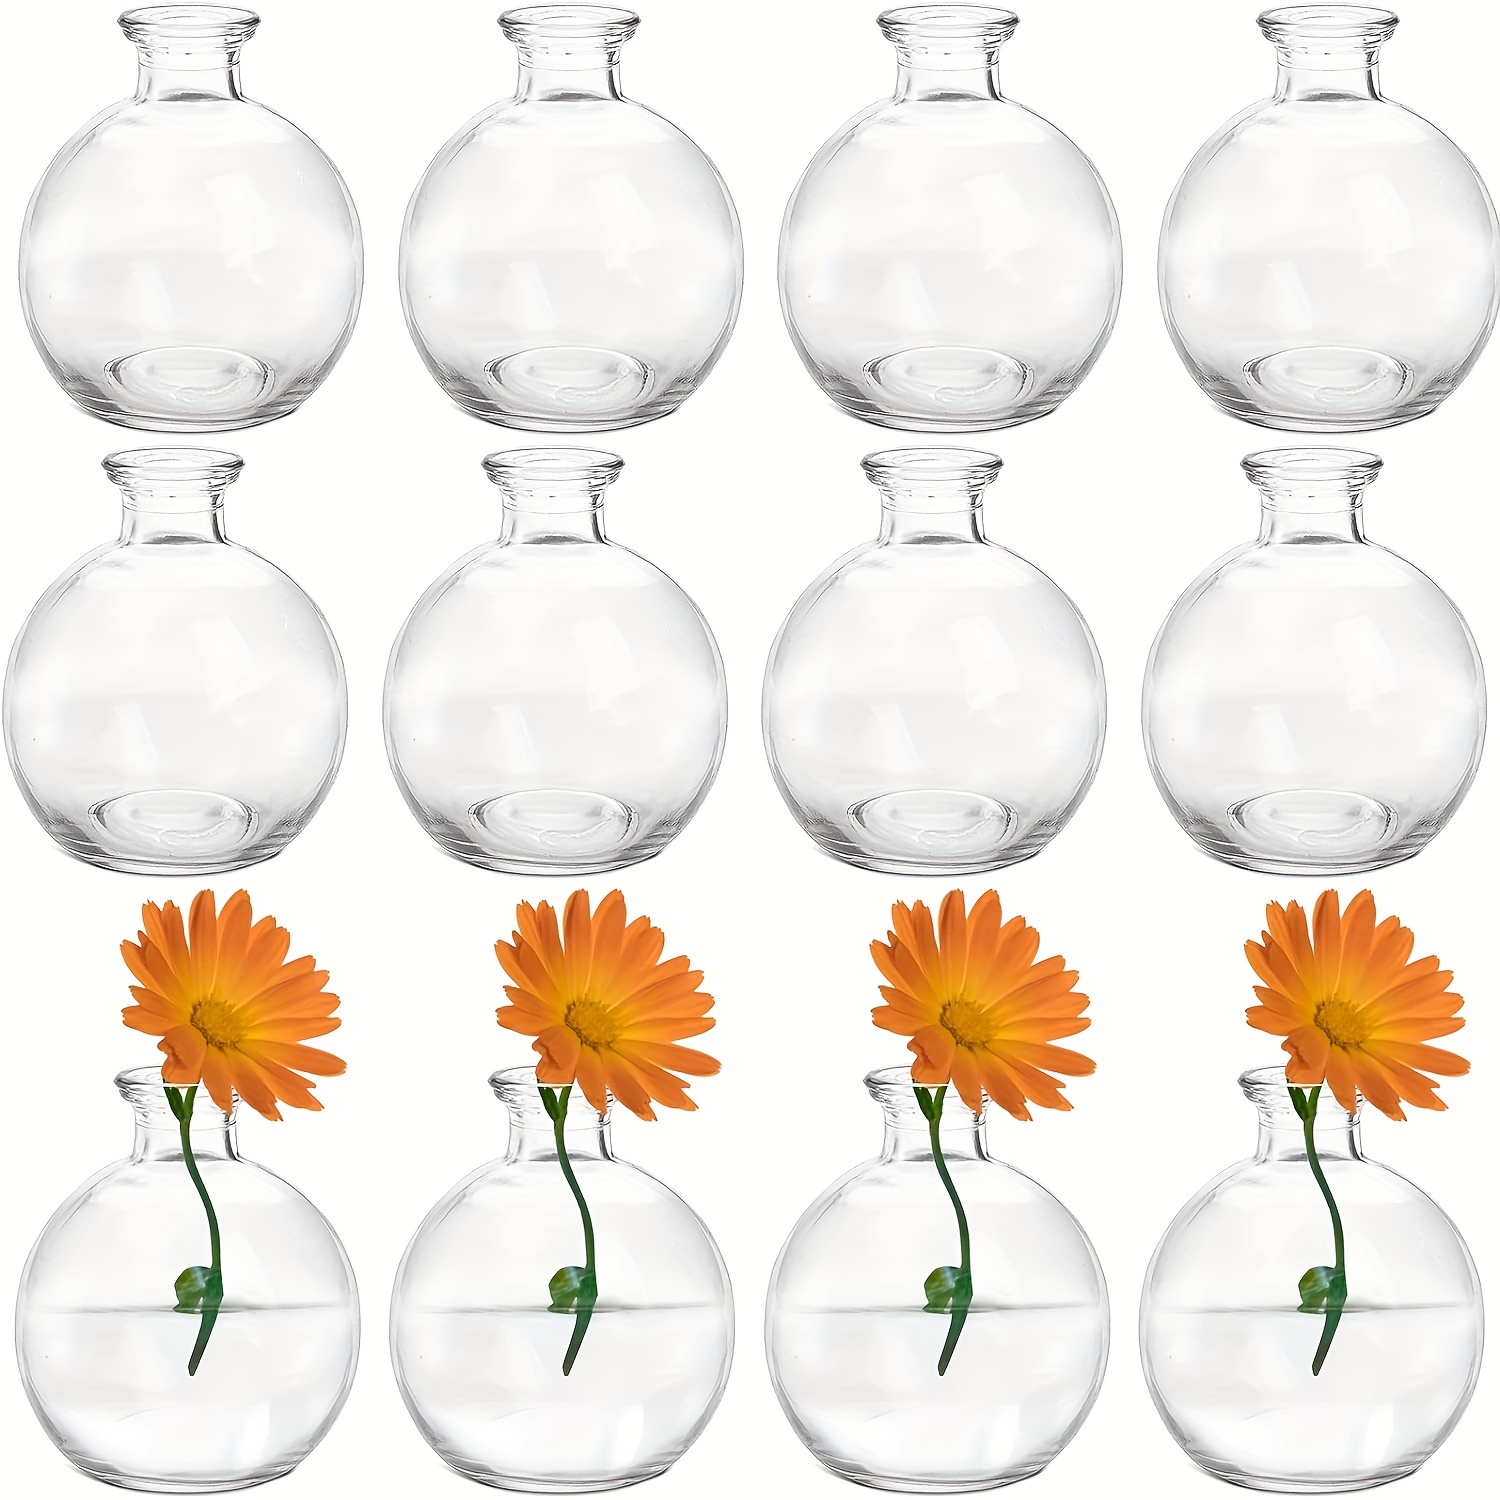 

12-pack Mini Round Glass Vases Set - Simple Transparent Centerpieces For Home, Living Room, Kitchen Decor And Holiday Party Events - No Flowers Included, Electricity-free